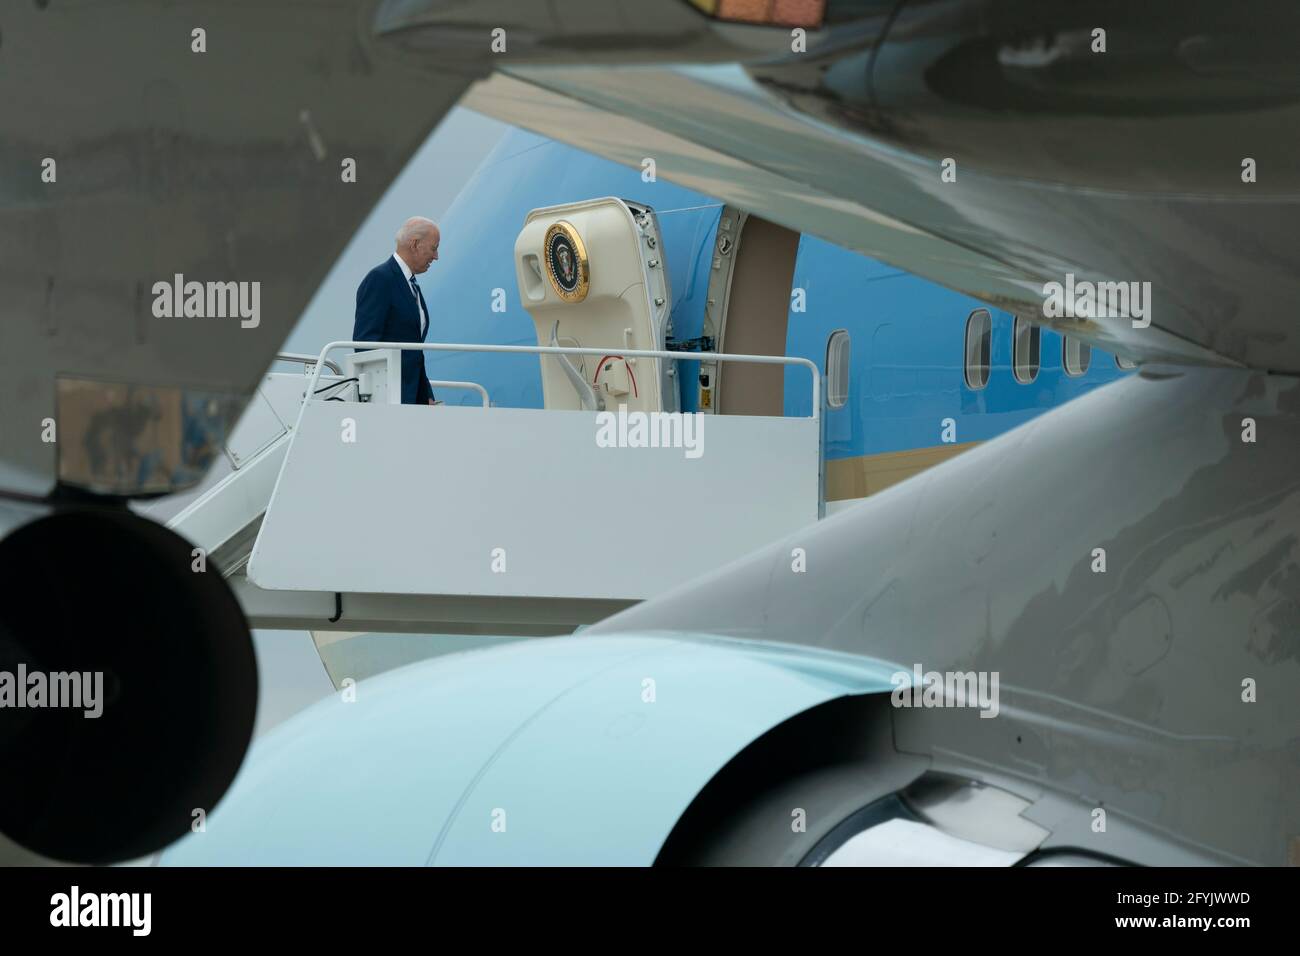 United States President Joe Biden boards Air Force One at Joint Base Andrews, to make remarks at Joint Base Langley-Eustis in Virginia,  Friday, May 28, 2021. Credit: Chris Kleponis / Pool/Sipa USA Stock Photo